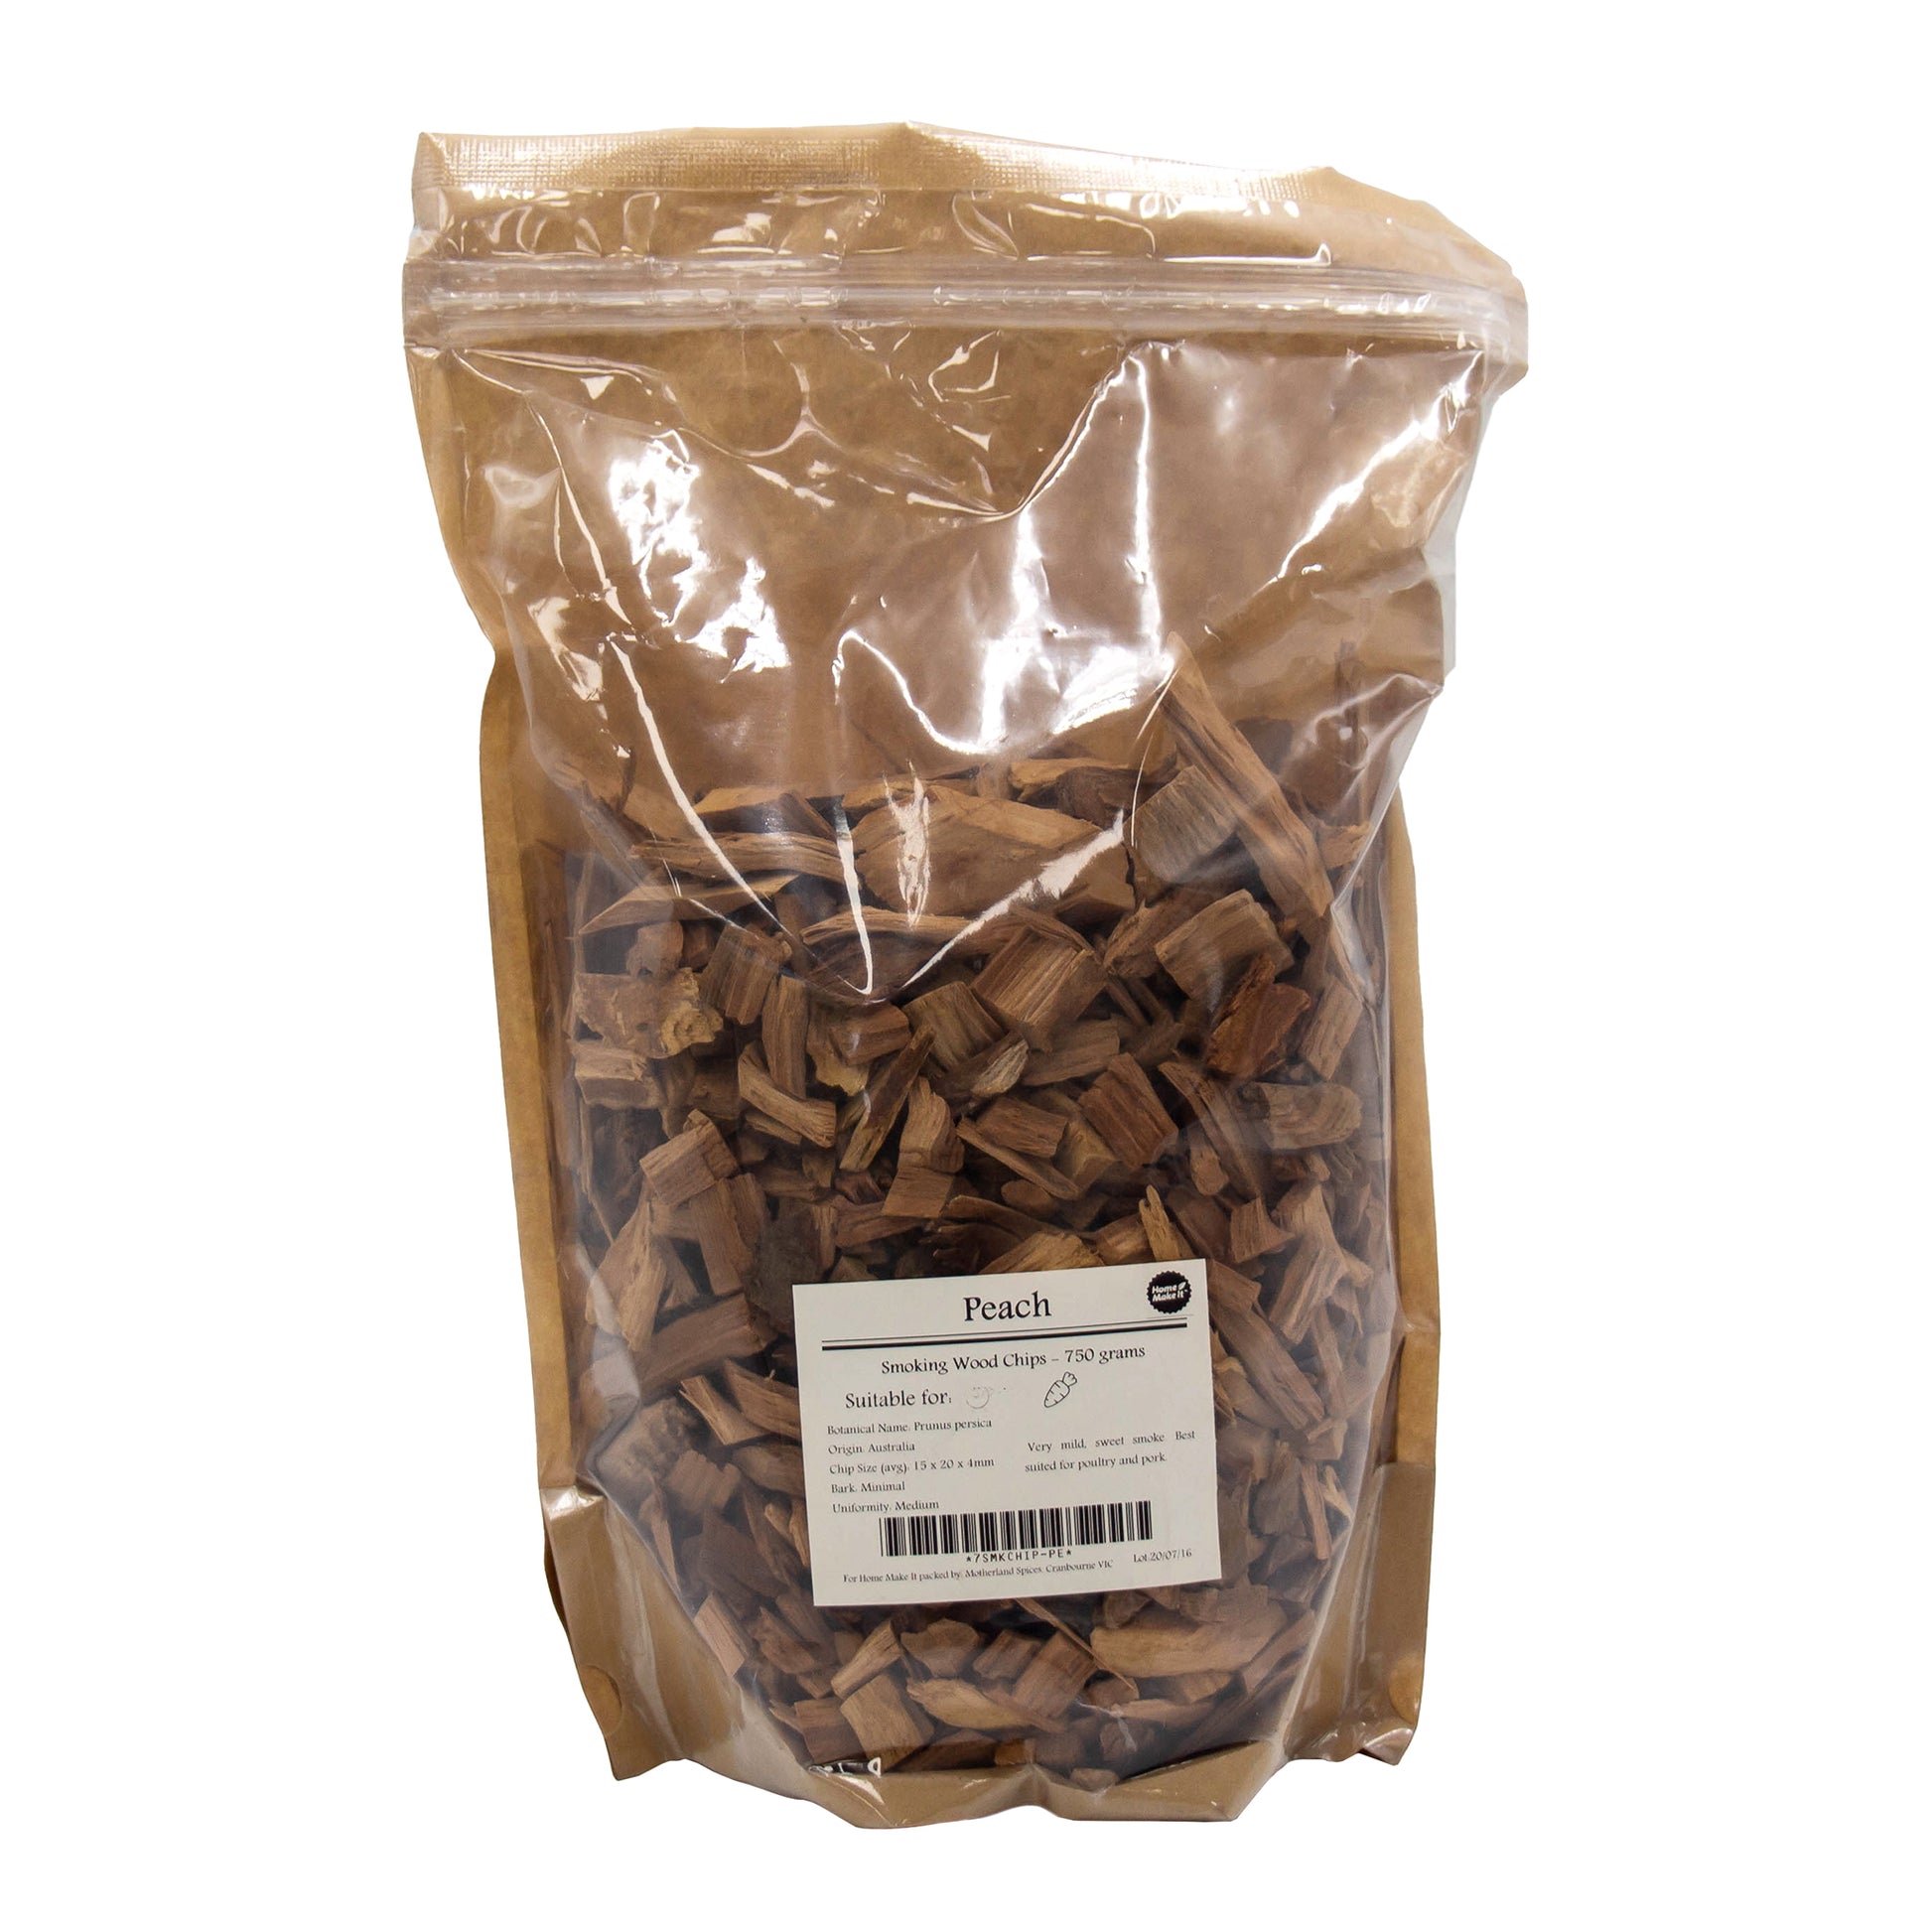 750g bag of Peach wood chips for smoking meats